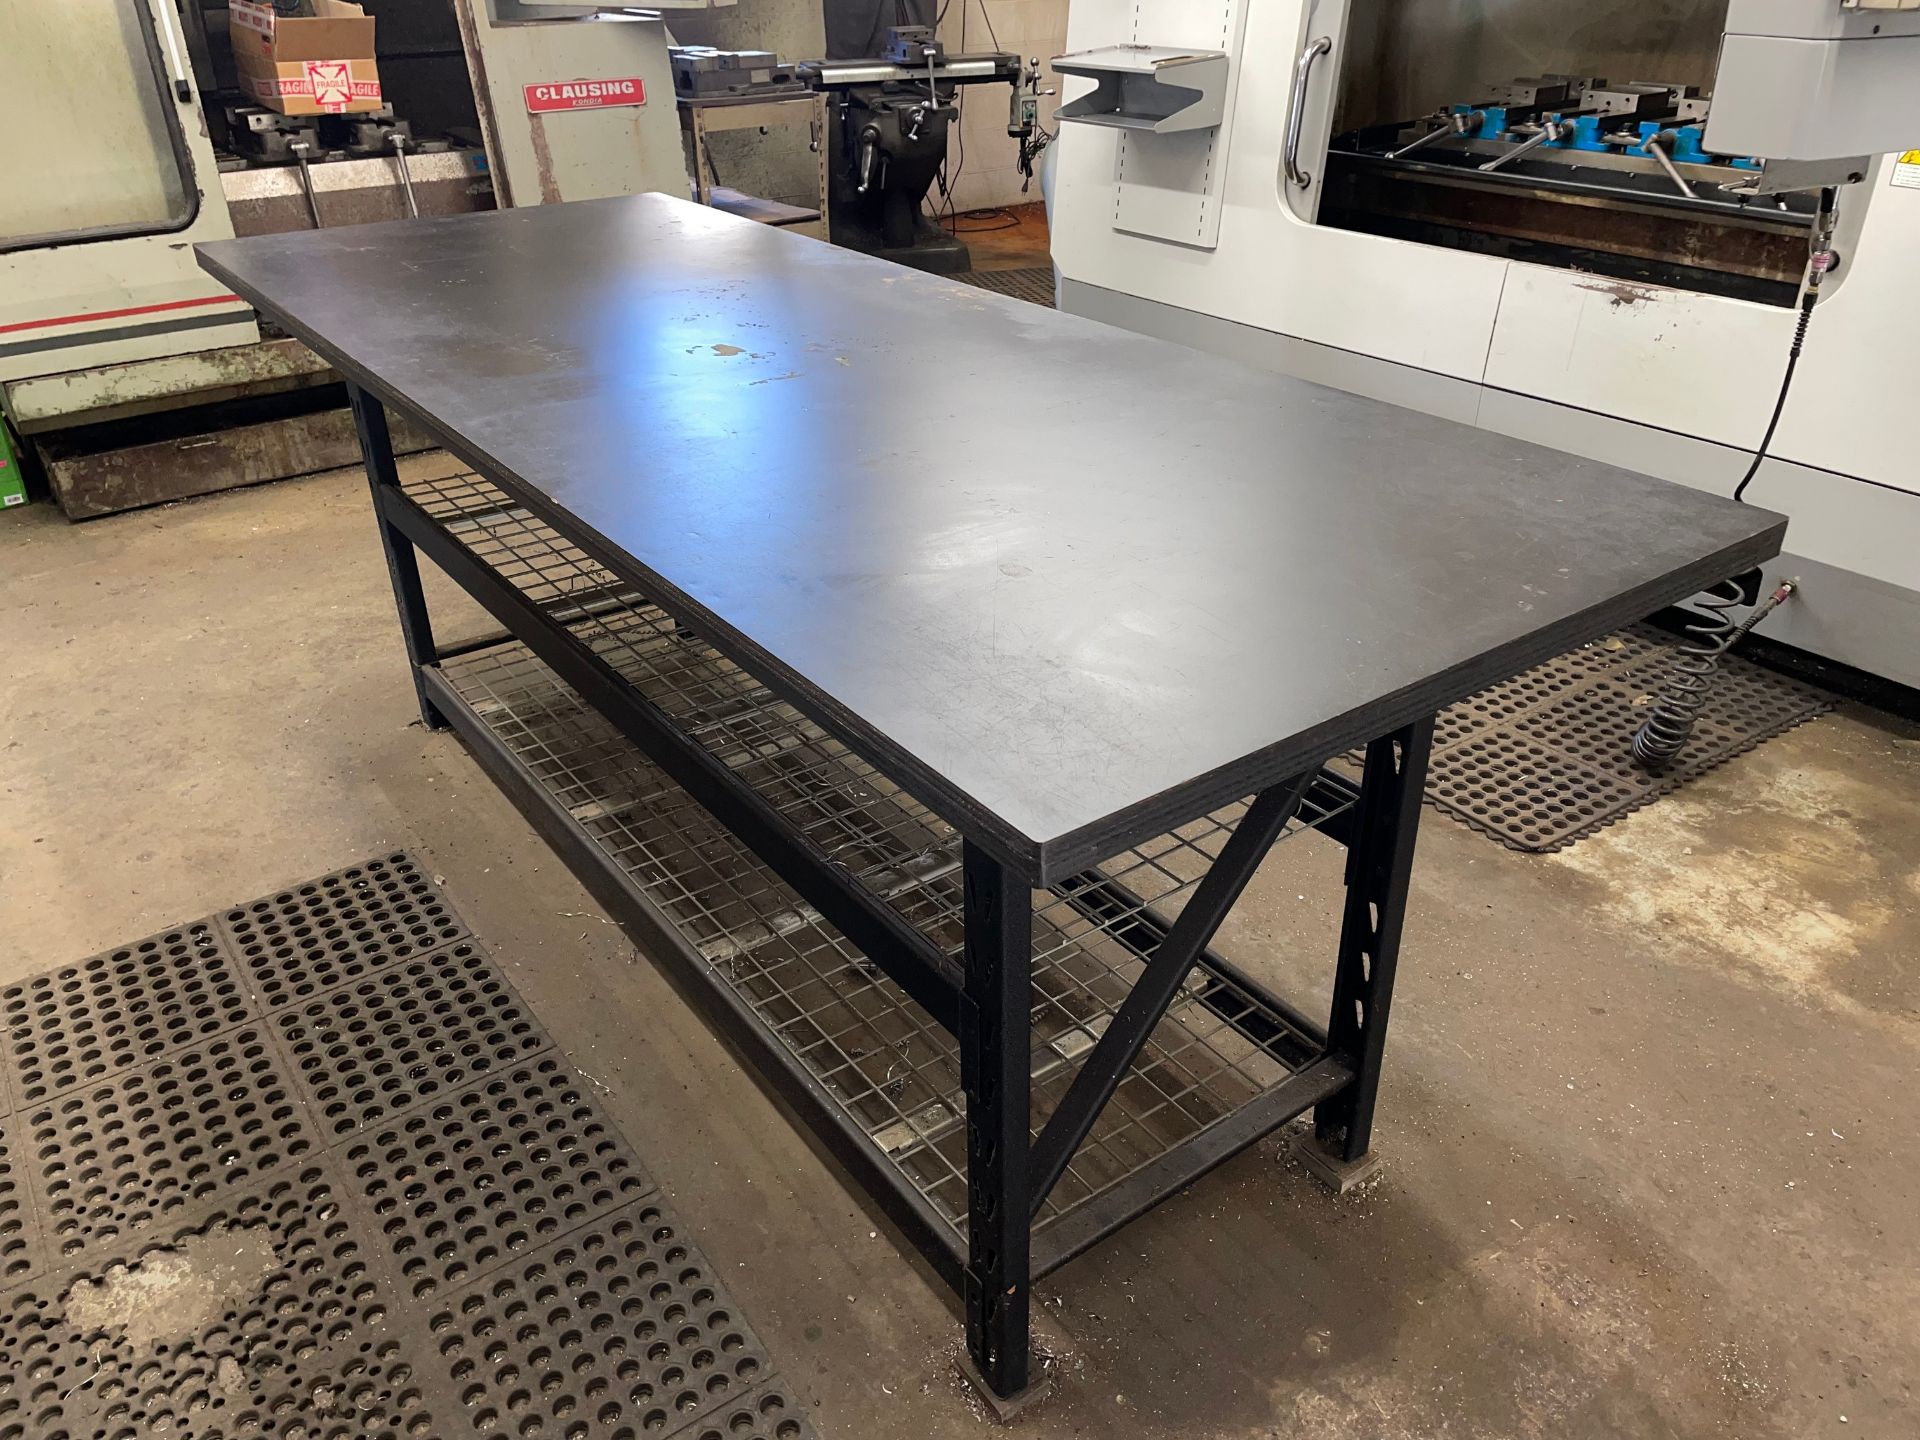 Steel Frame Table 96"L x 36"W with Shelves - Image 2 of 4